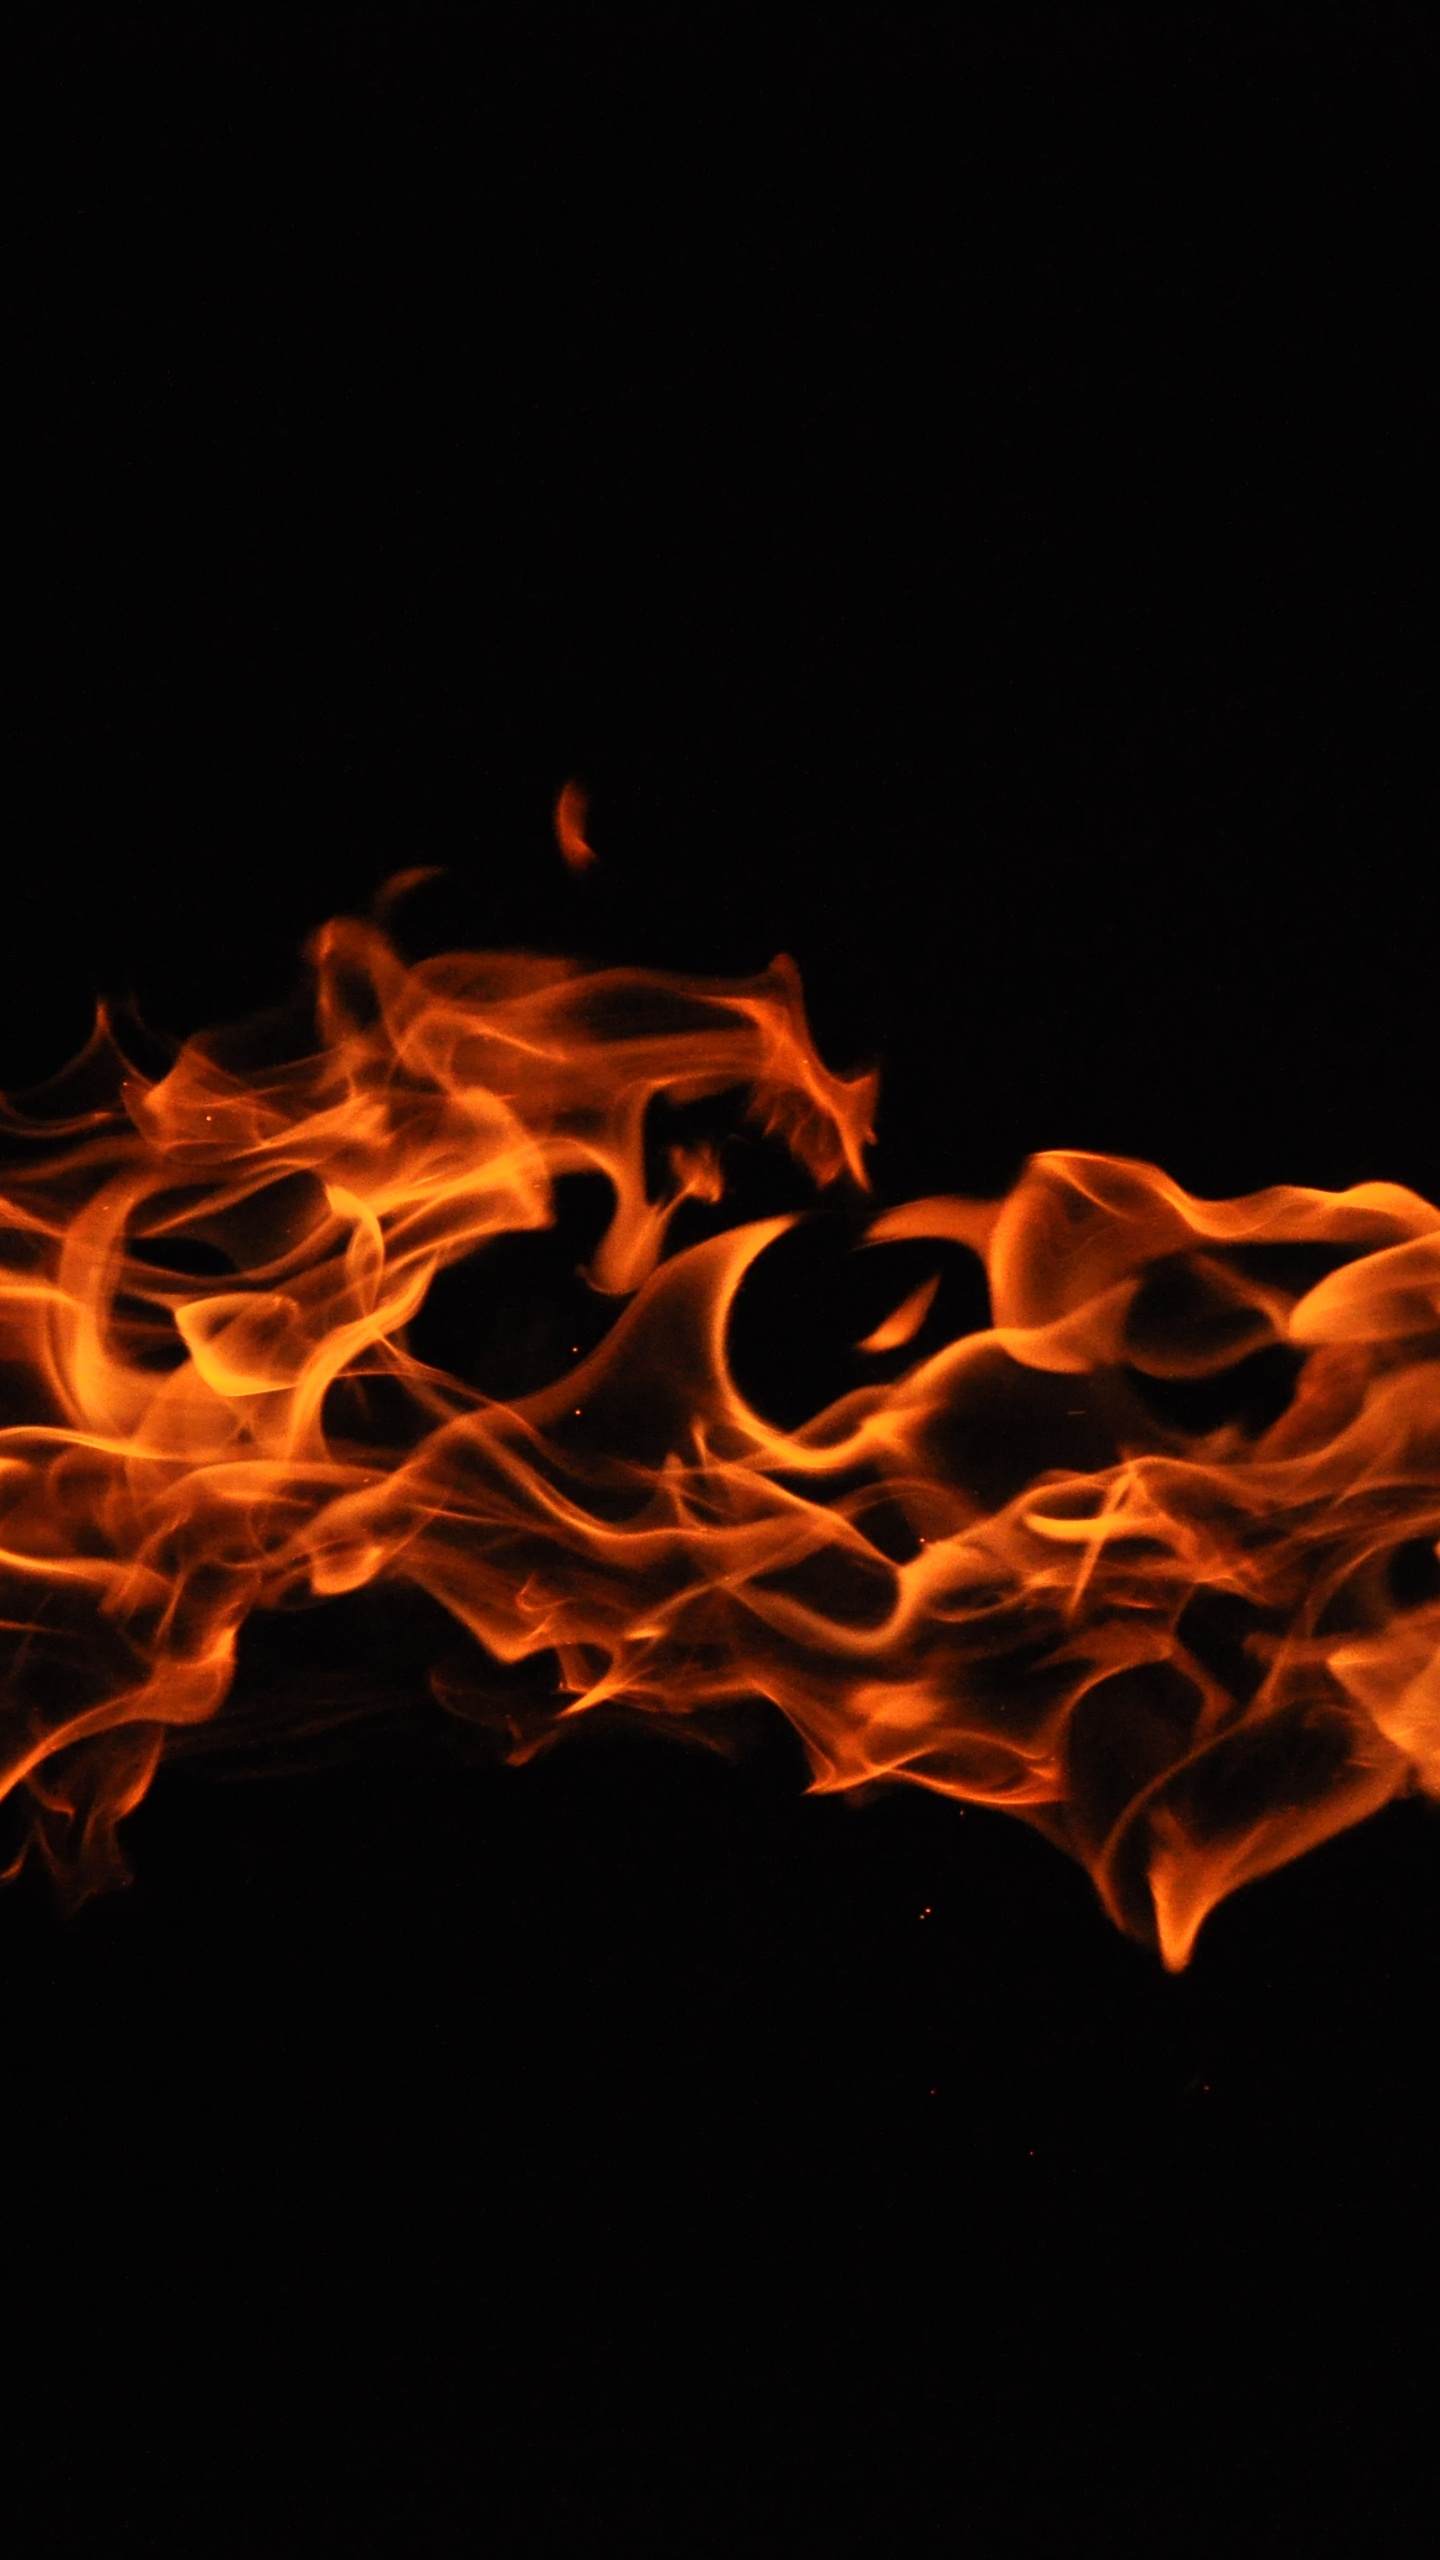 Fire in Black Background With Black Background. Wallpaper in 1440x2560 Resolution